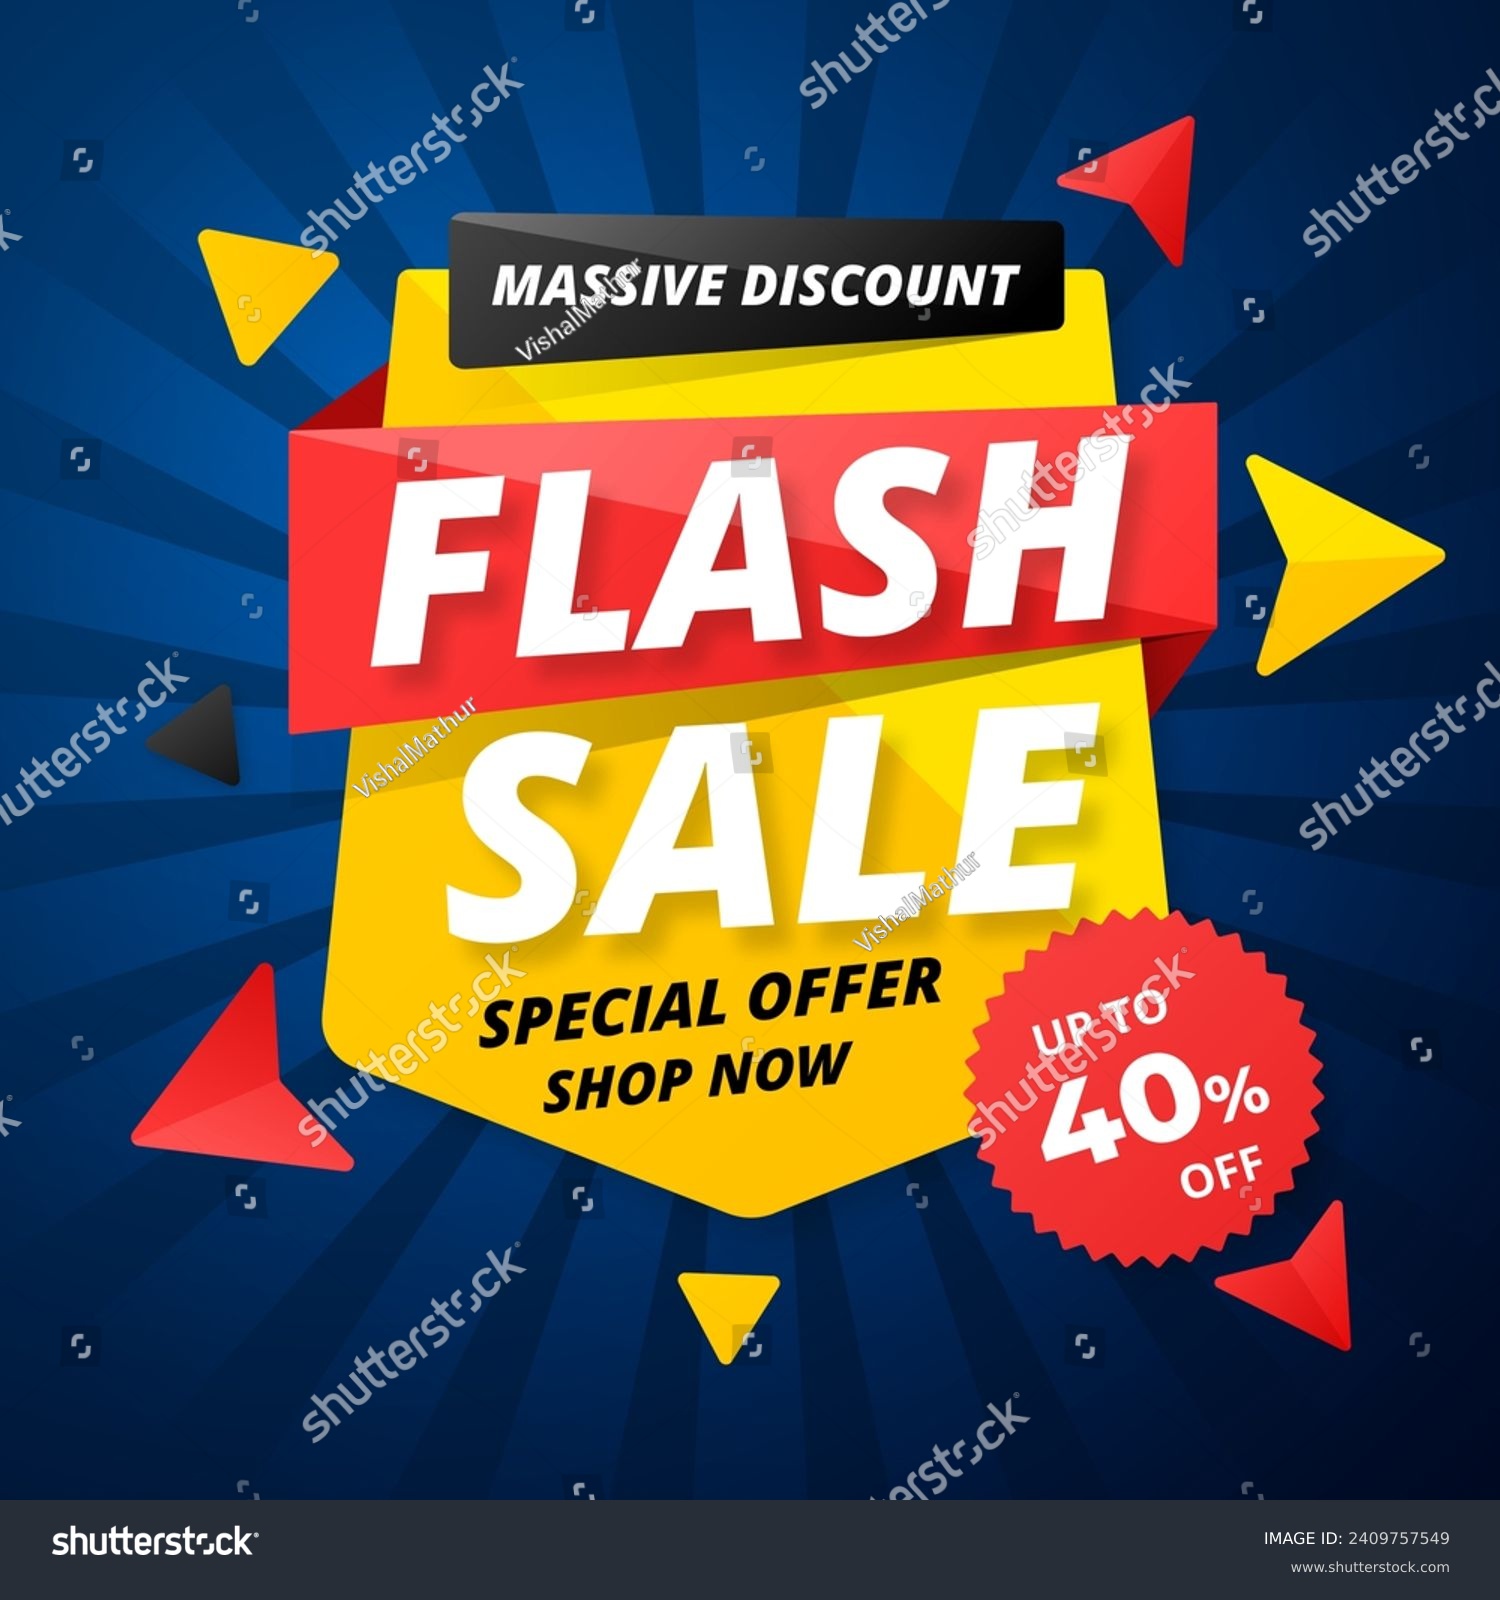 SVG of Flash Sale with discount up to 40%. Special Offer. Vector illustration. Shop Now. Get discount 40%. Massive Discount. svg